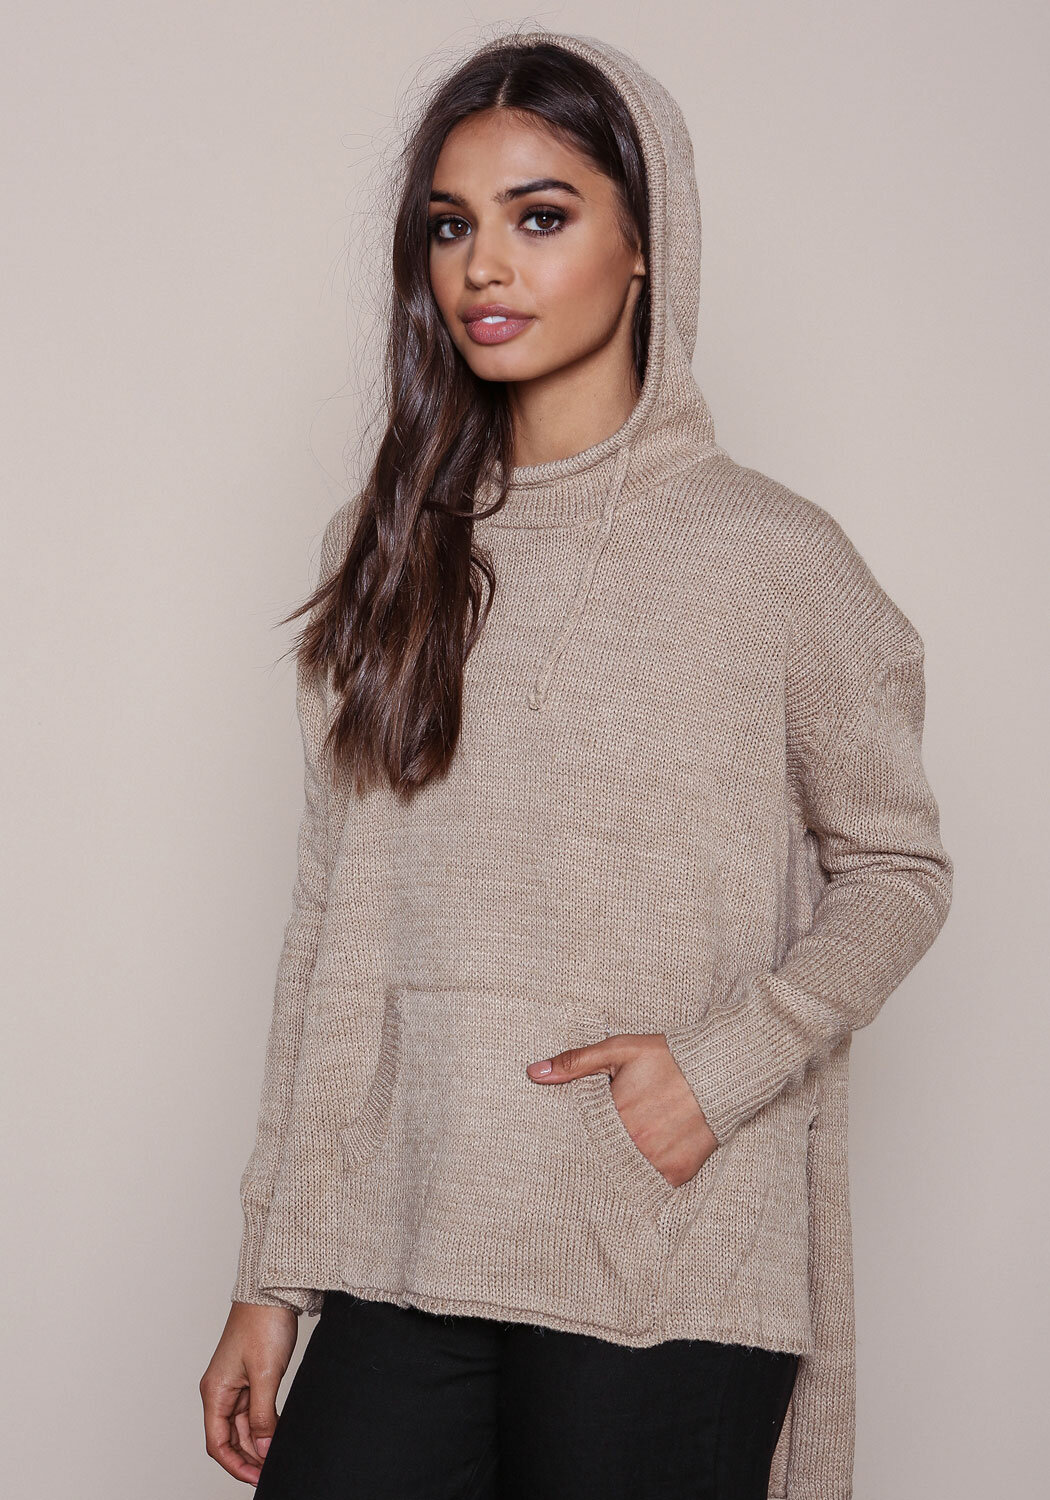 Junior Clothing | Oatmeal Wool Blend Hooded Sweater | Loveculture.com